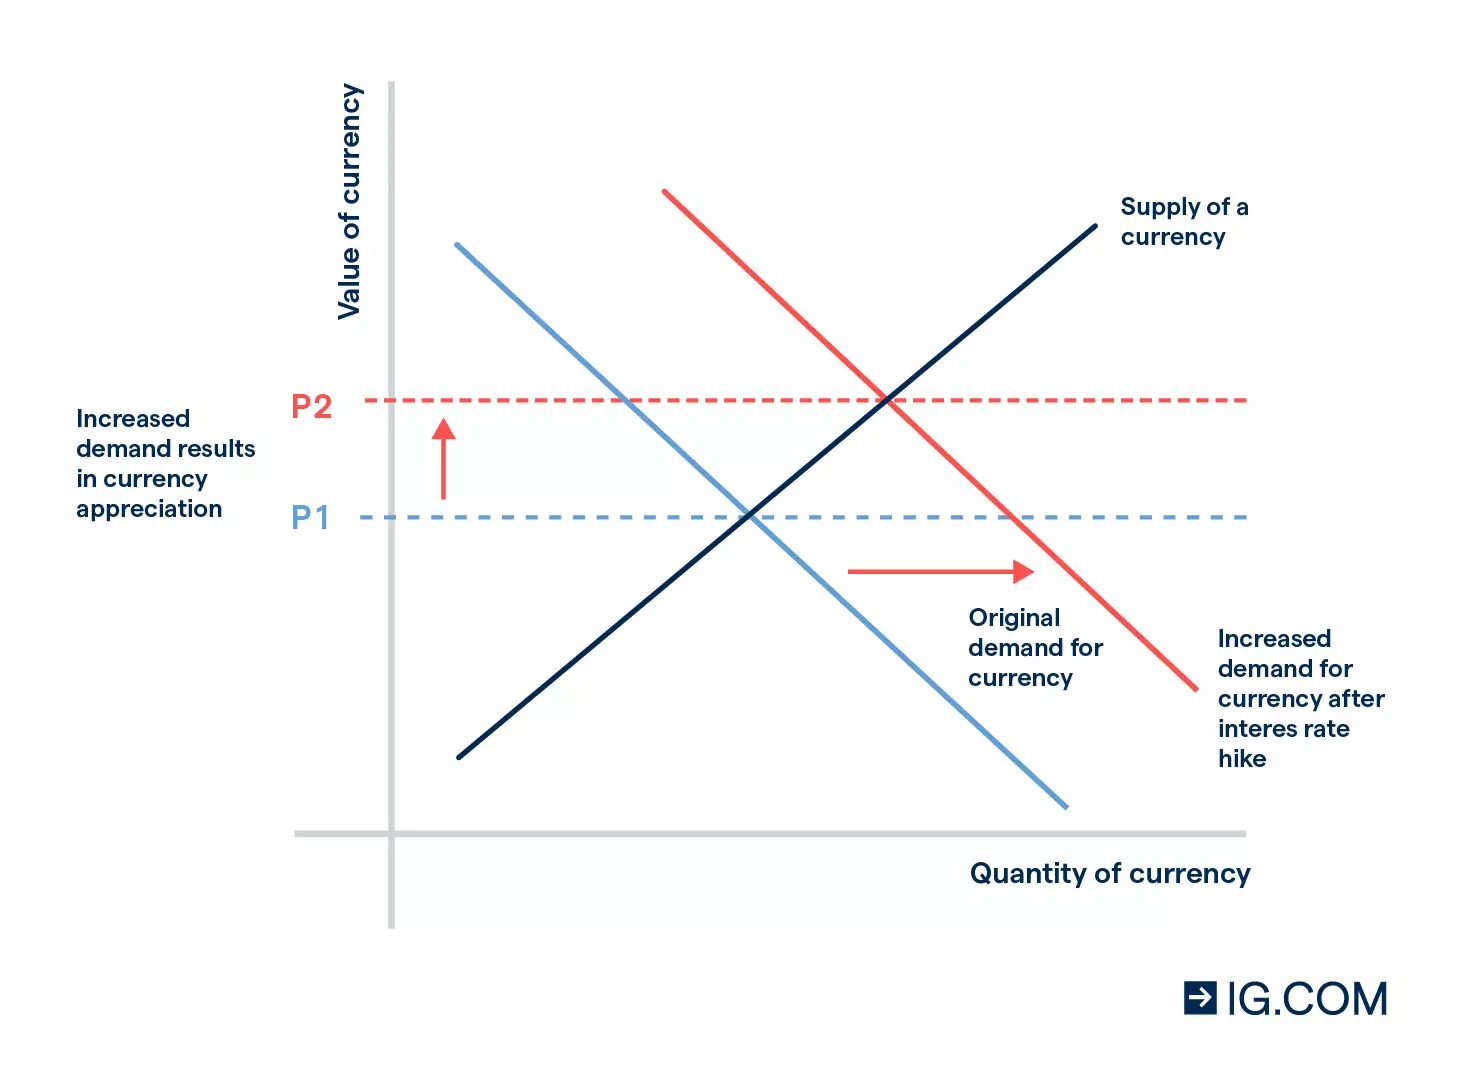 Image showing how demand for a currency drives the value of a currency up